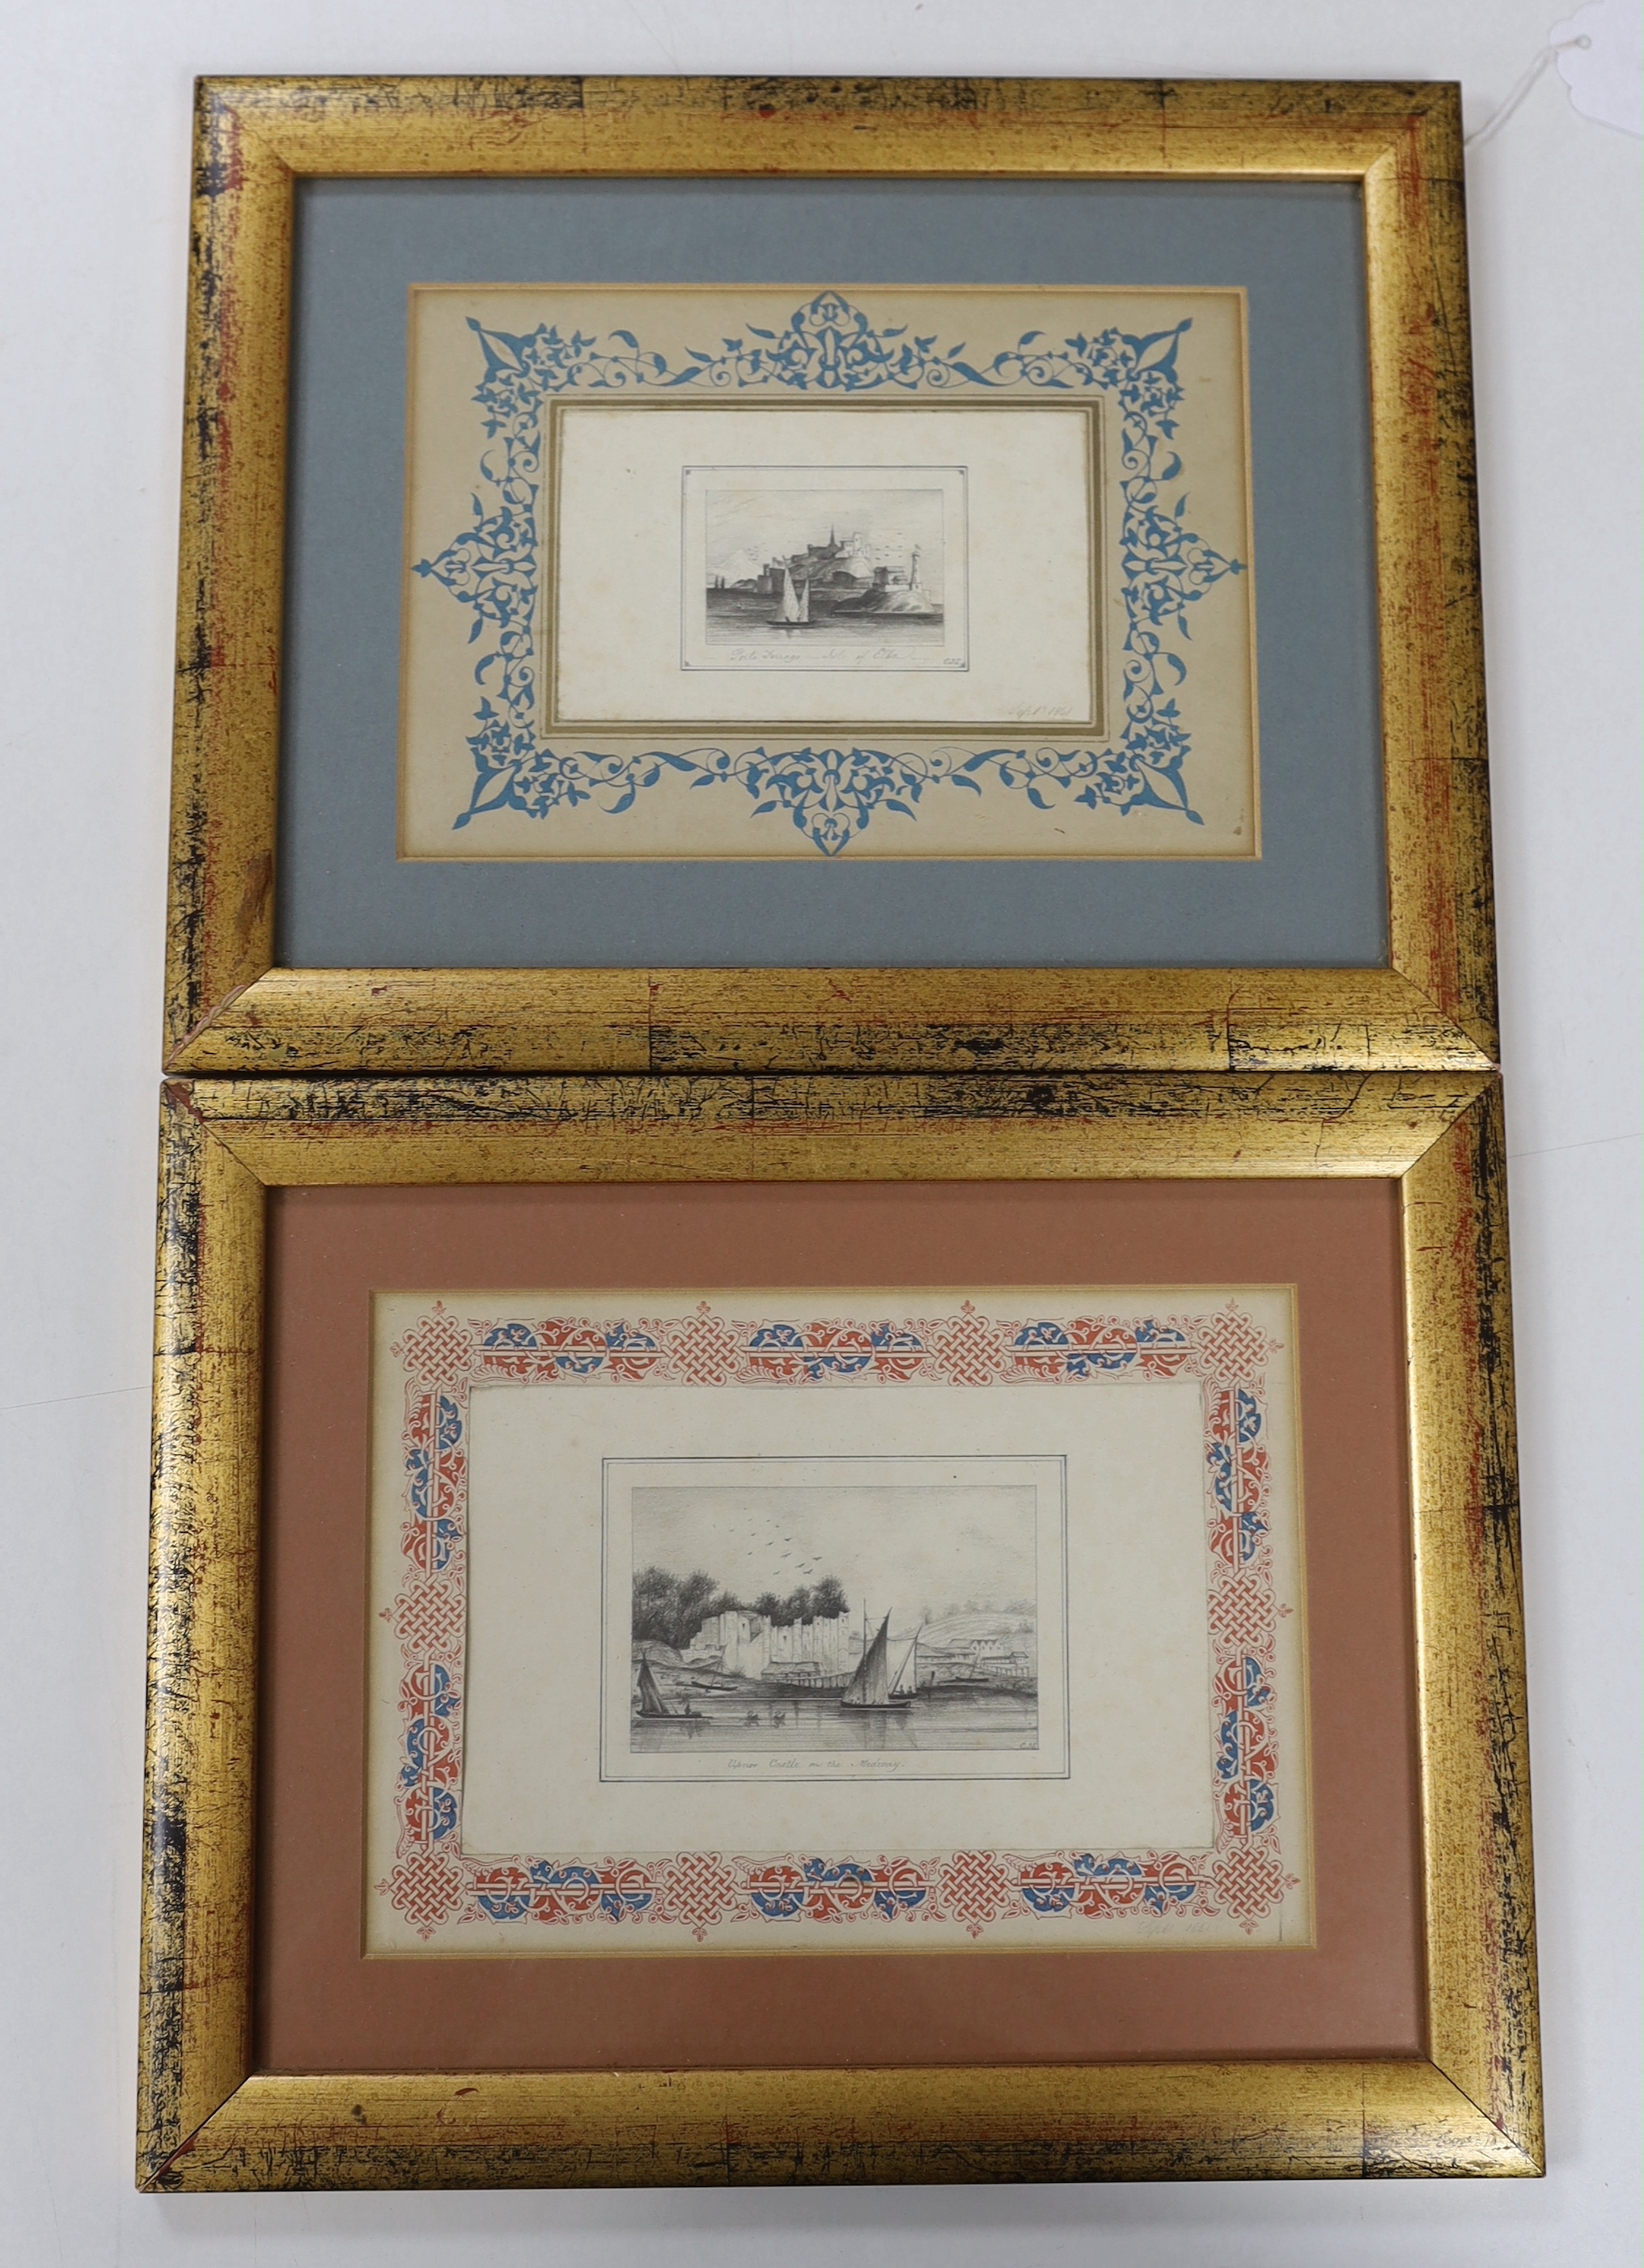 C.J.S. 1841, two pencil vignettes of Upnore Castle and Porto Ferrago, initialled, one dated, 6 x 9 cm and 4.5 x 5.5cm